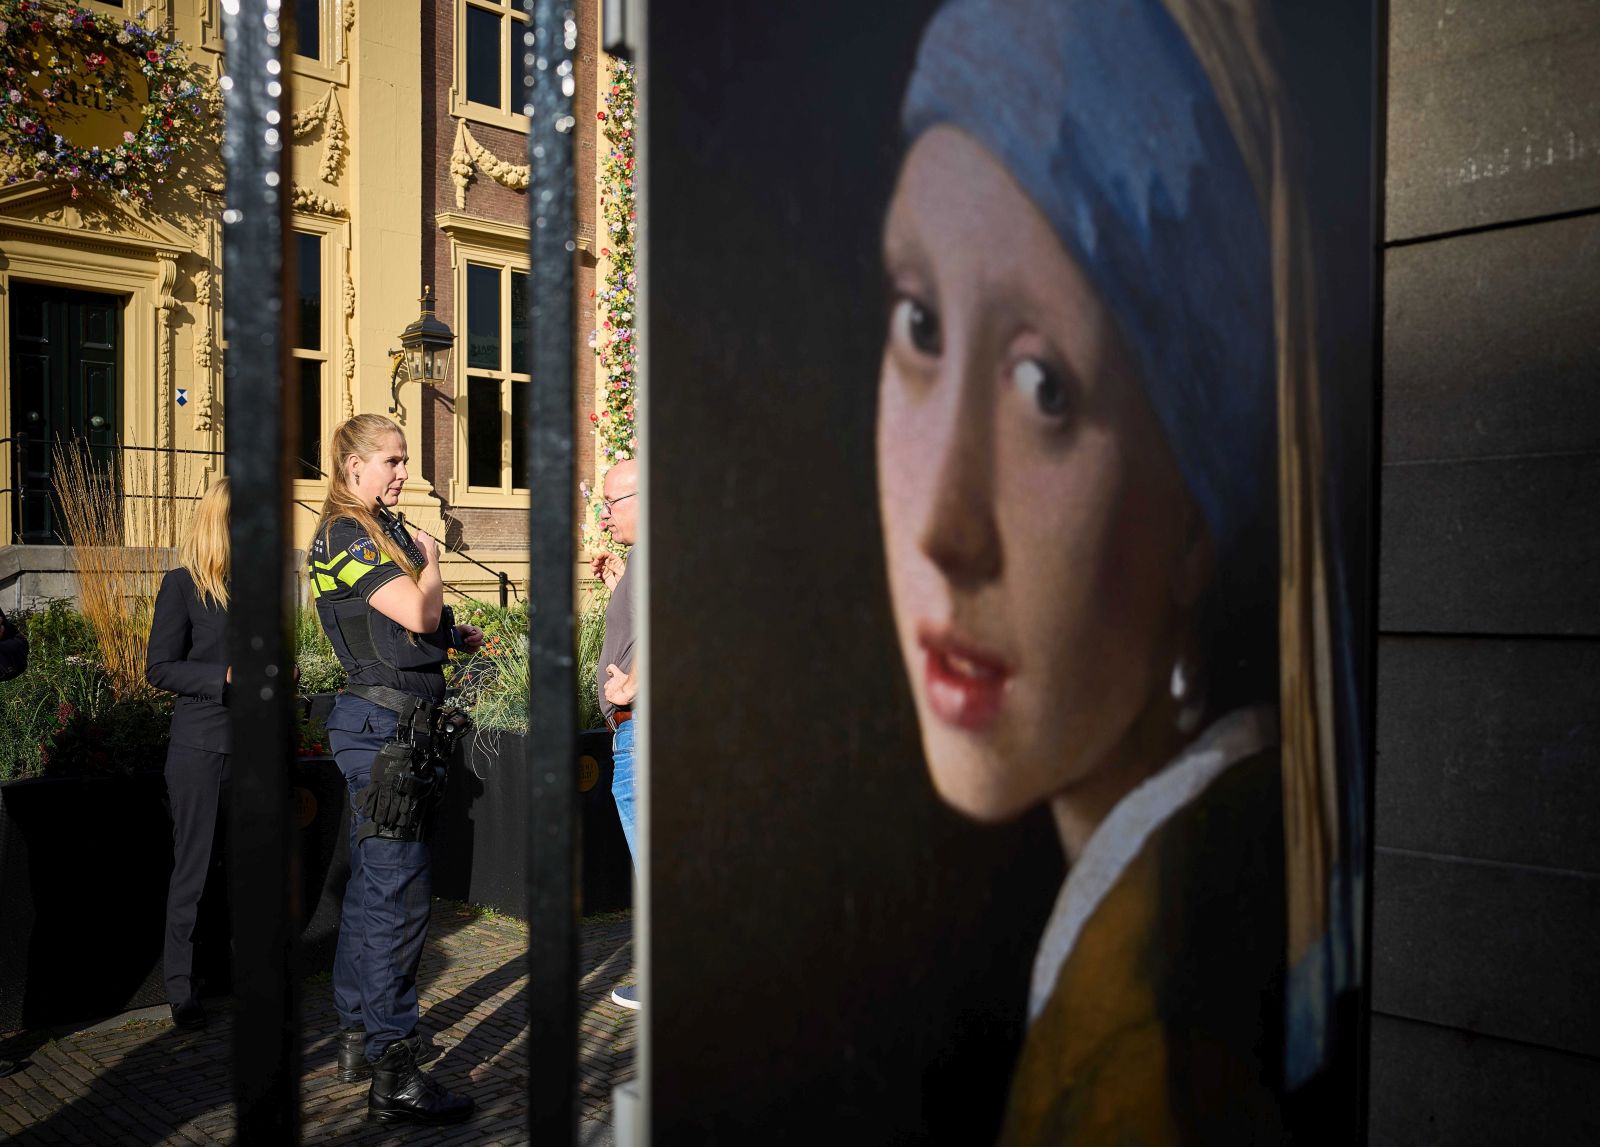 epa10269111 A police officer (L) stands outside the Mauritshuis museum, where three people were arrested for attempting to smudge Vermeer's painting 'Girl with a Pearl Earring', currently exhibited there, in The Hague, Netherlands, 27 October 2022. They were wearing shirts from the Just Stop Oil campaign group, whose members are responsible for recent acts of vandalism - such as throwing soup at paintings, sports cars and luxury shop windows across Europe - in an attempt to raise awareness about their protest against fossil fuels.  EPA/PHIL NIJHUIS